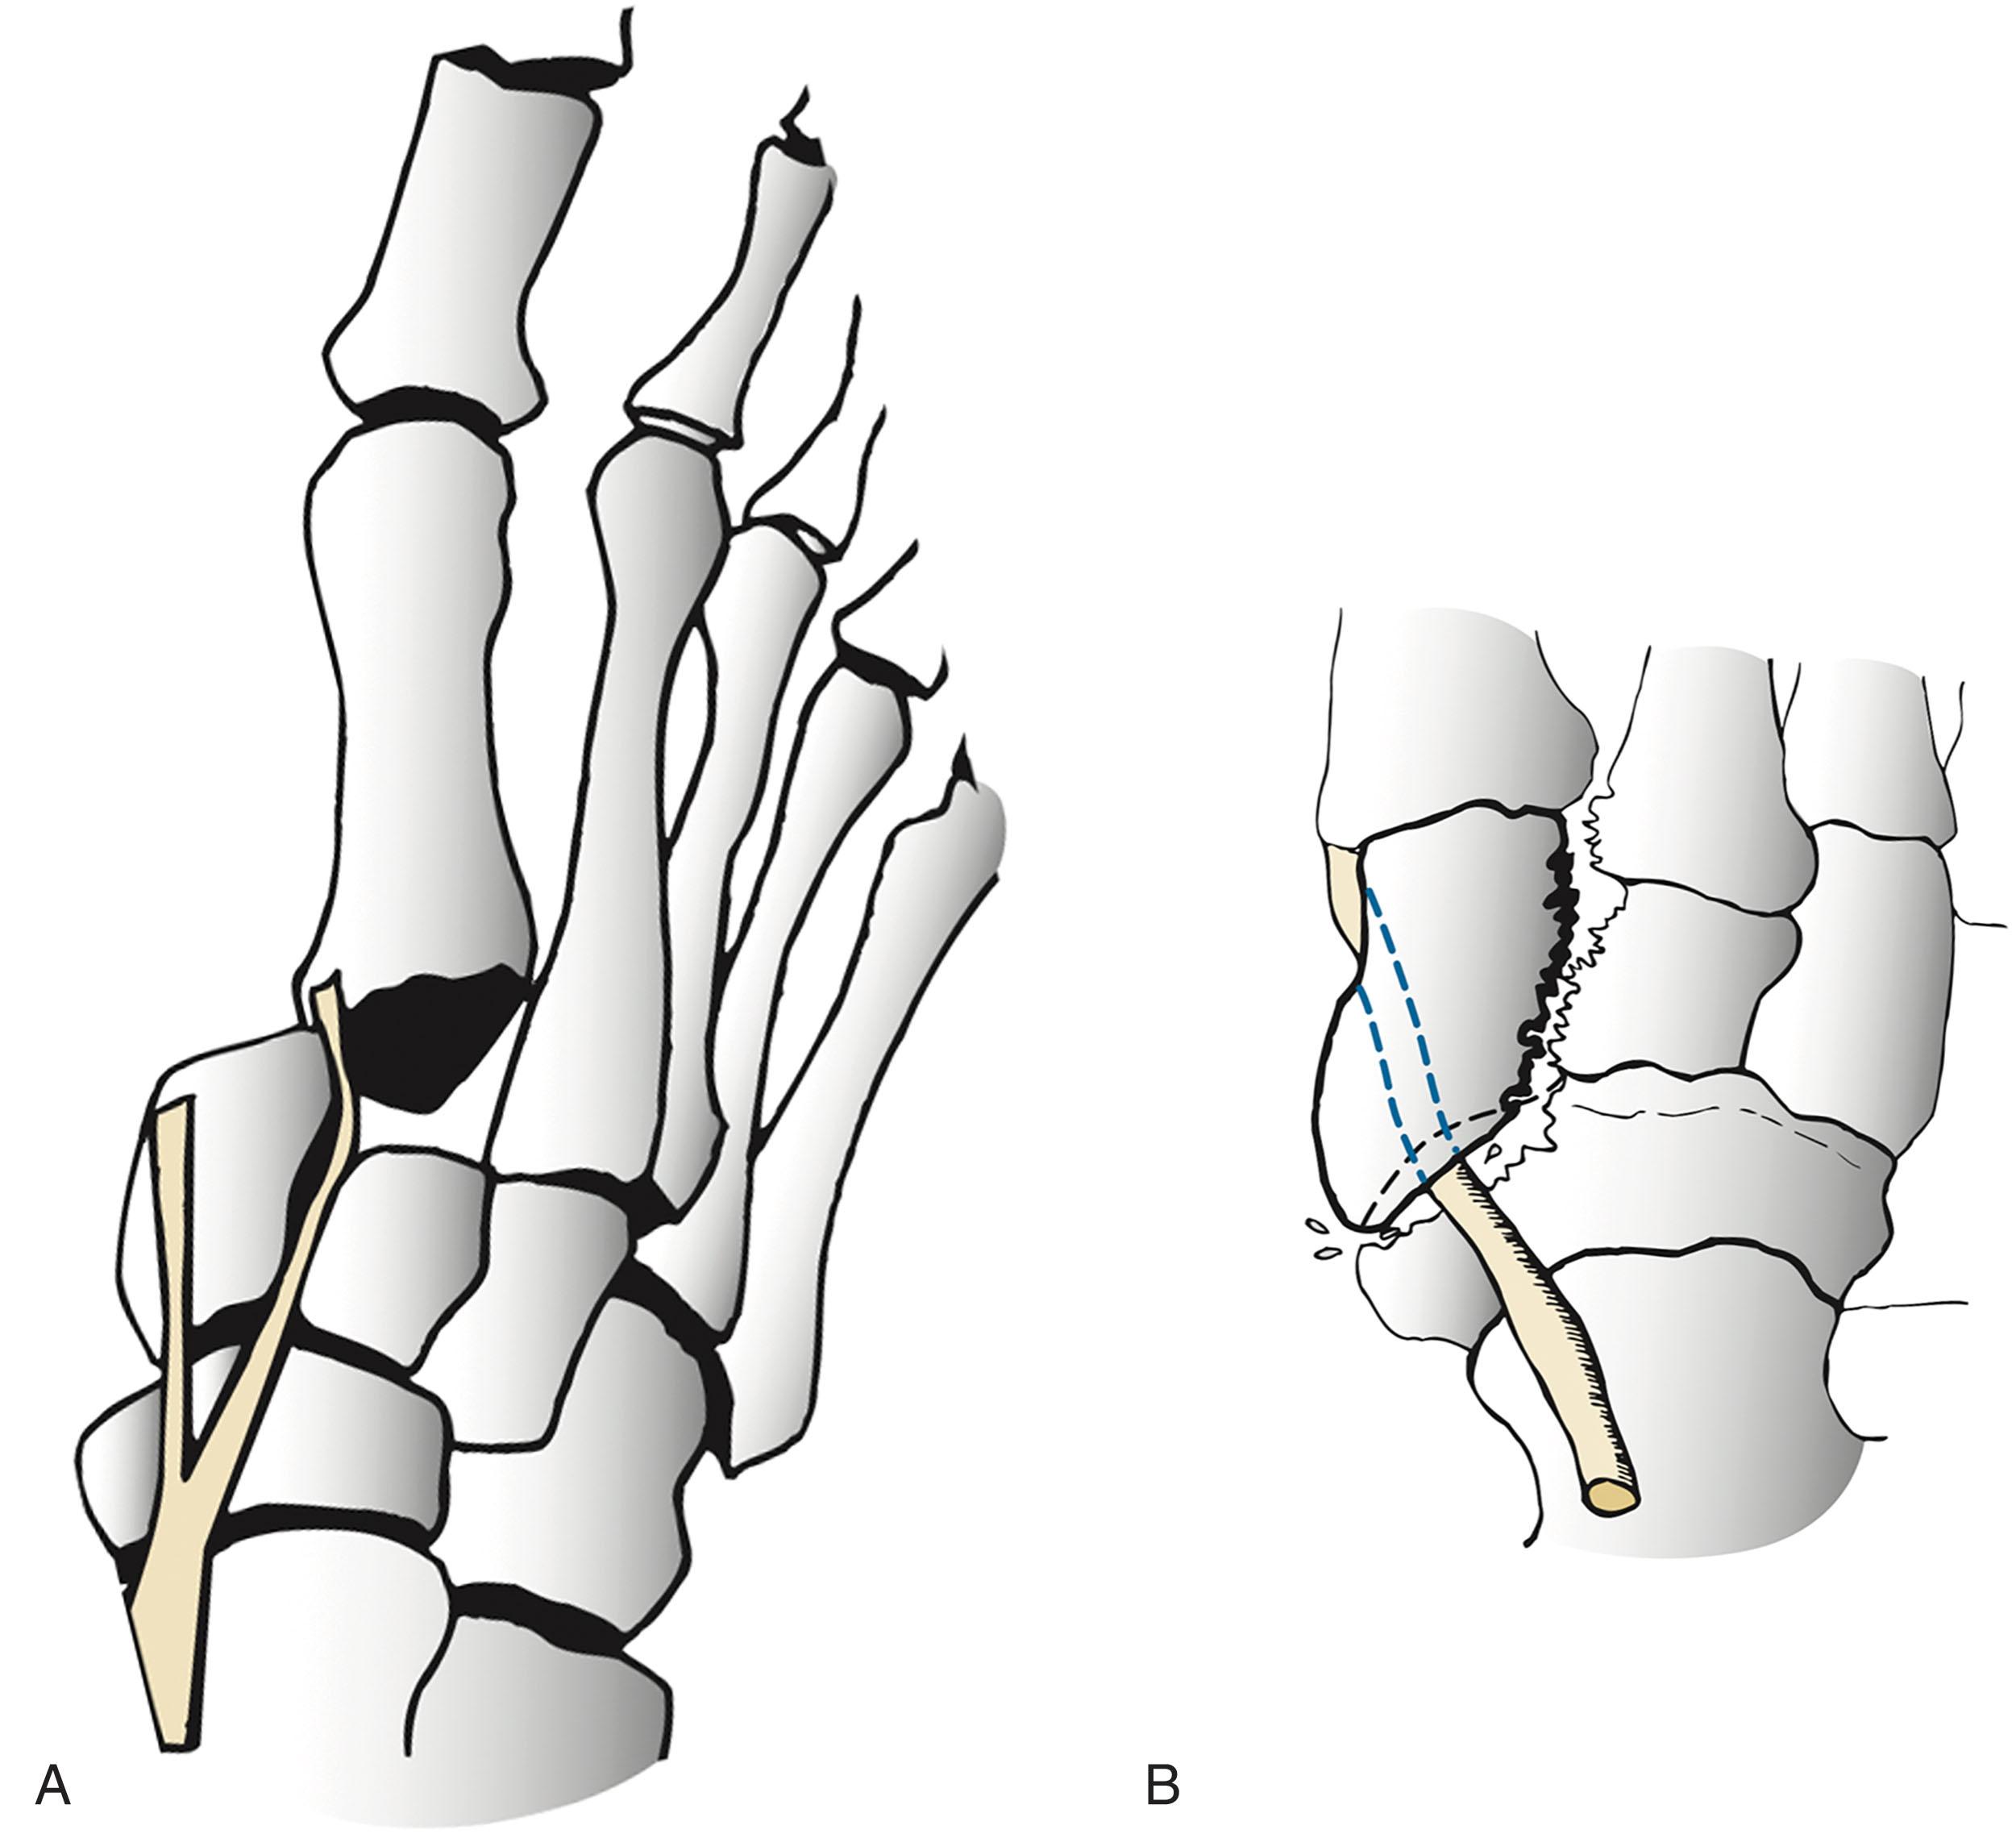 Fig. 47-17, Patterns of tibialis anterior tendon (TA) interposition. A , Simultaneous disruption of the first tarsometatarsal and intercuneiform joints allows interposition of the lateral slip of the TA between the medial and middle cuneiforms. B , Interposition of the TA between the dislocated medial cuneiform and navicular. ( A , From Lowe J, Yosipovitch Z: Tarsometatarsal dislocation: a mechanism blocking manipulative reduction. Case report, J Bone Joint Surg Am 58:1029–1030, 1976. B ,